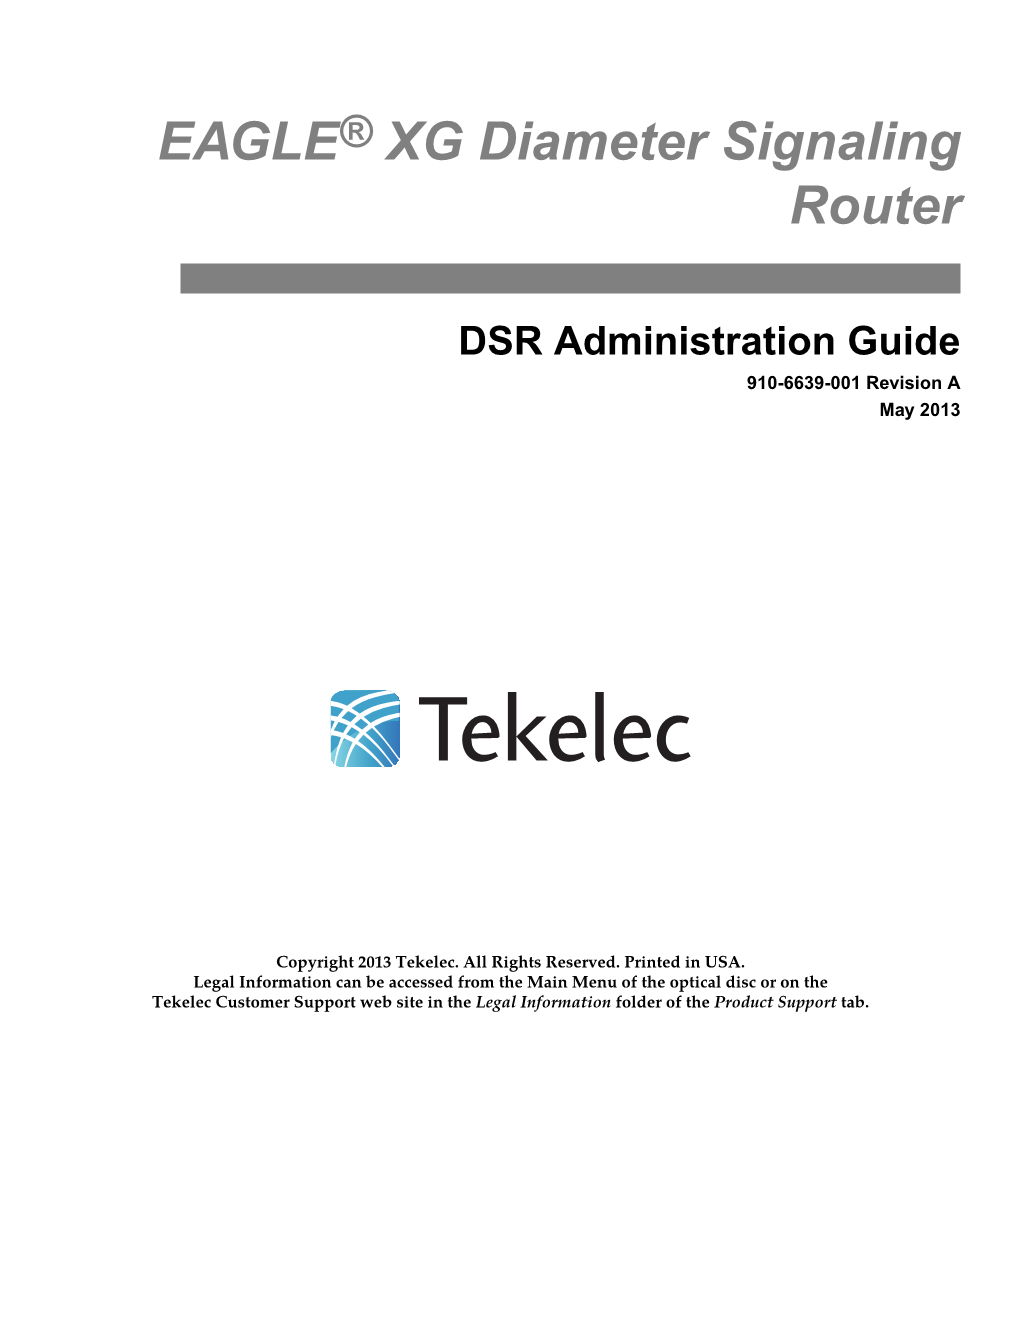 DSR Administration Guide 910-6639-001 Revision a May 2013